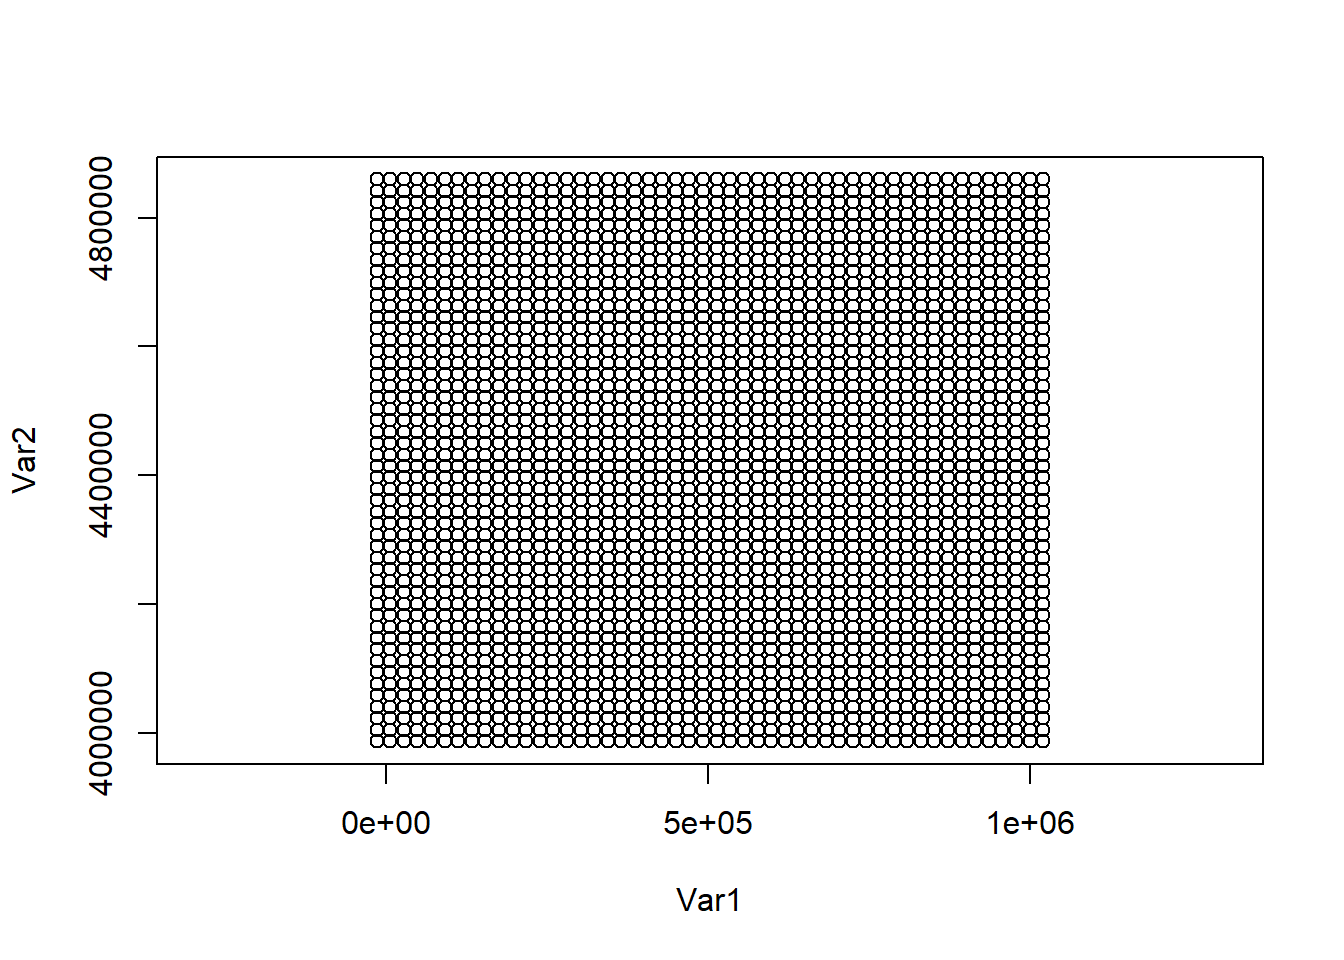 Grid locations for prediction.